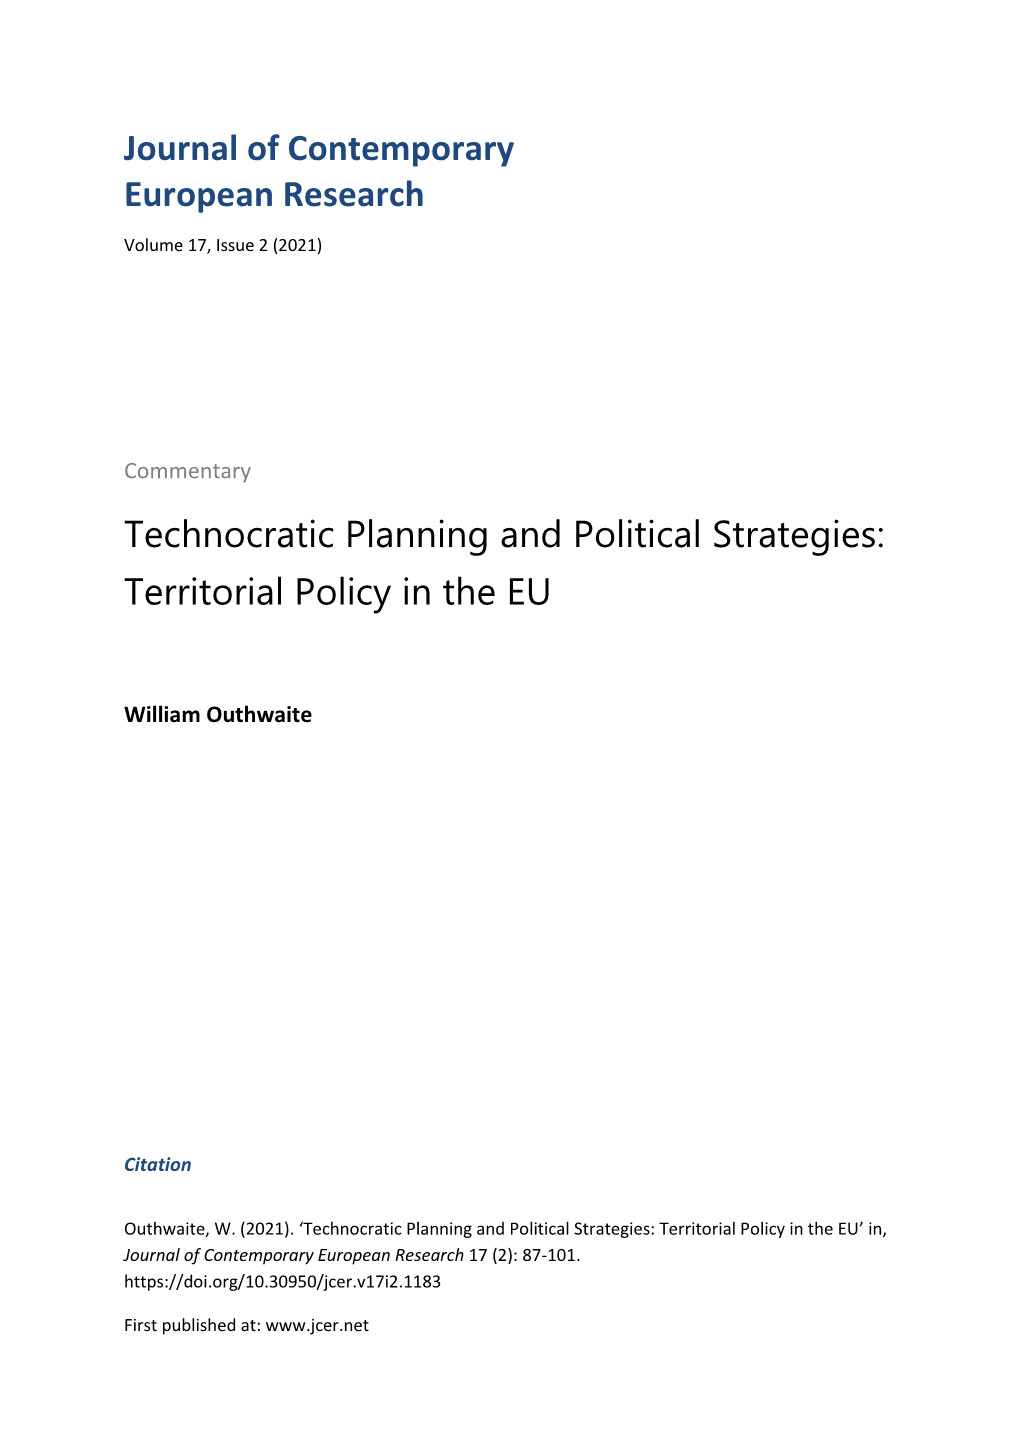 Journal of Contemporary European Research Technocratic Planning